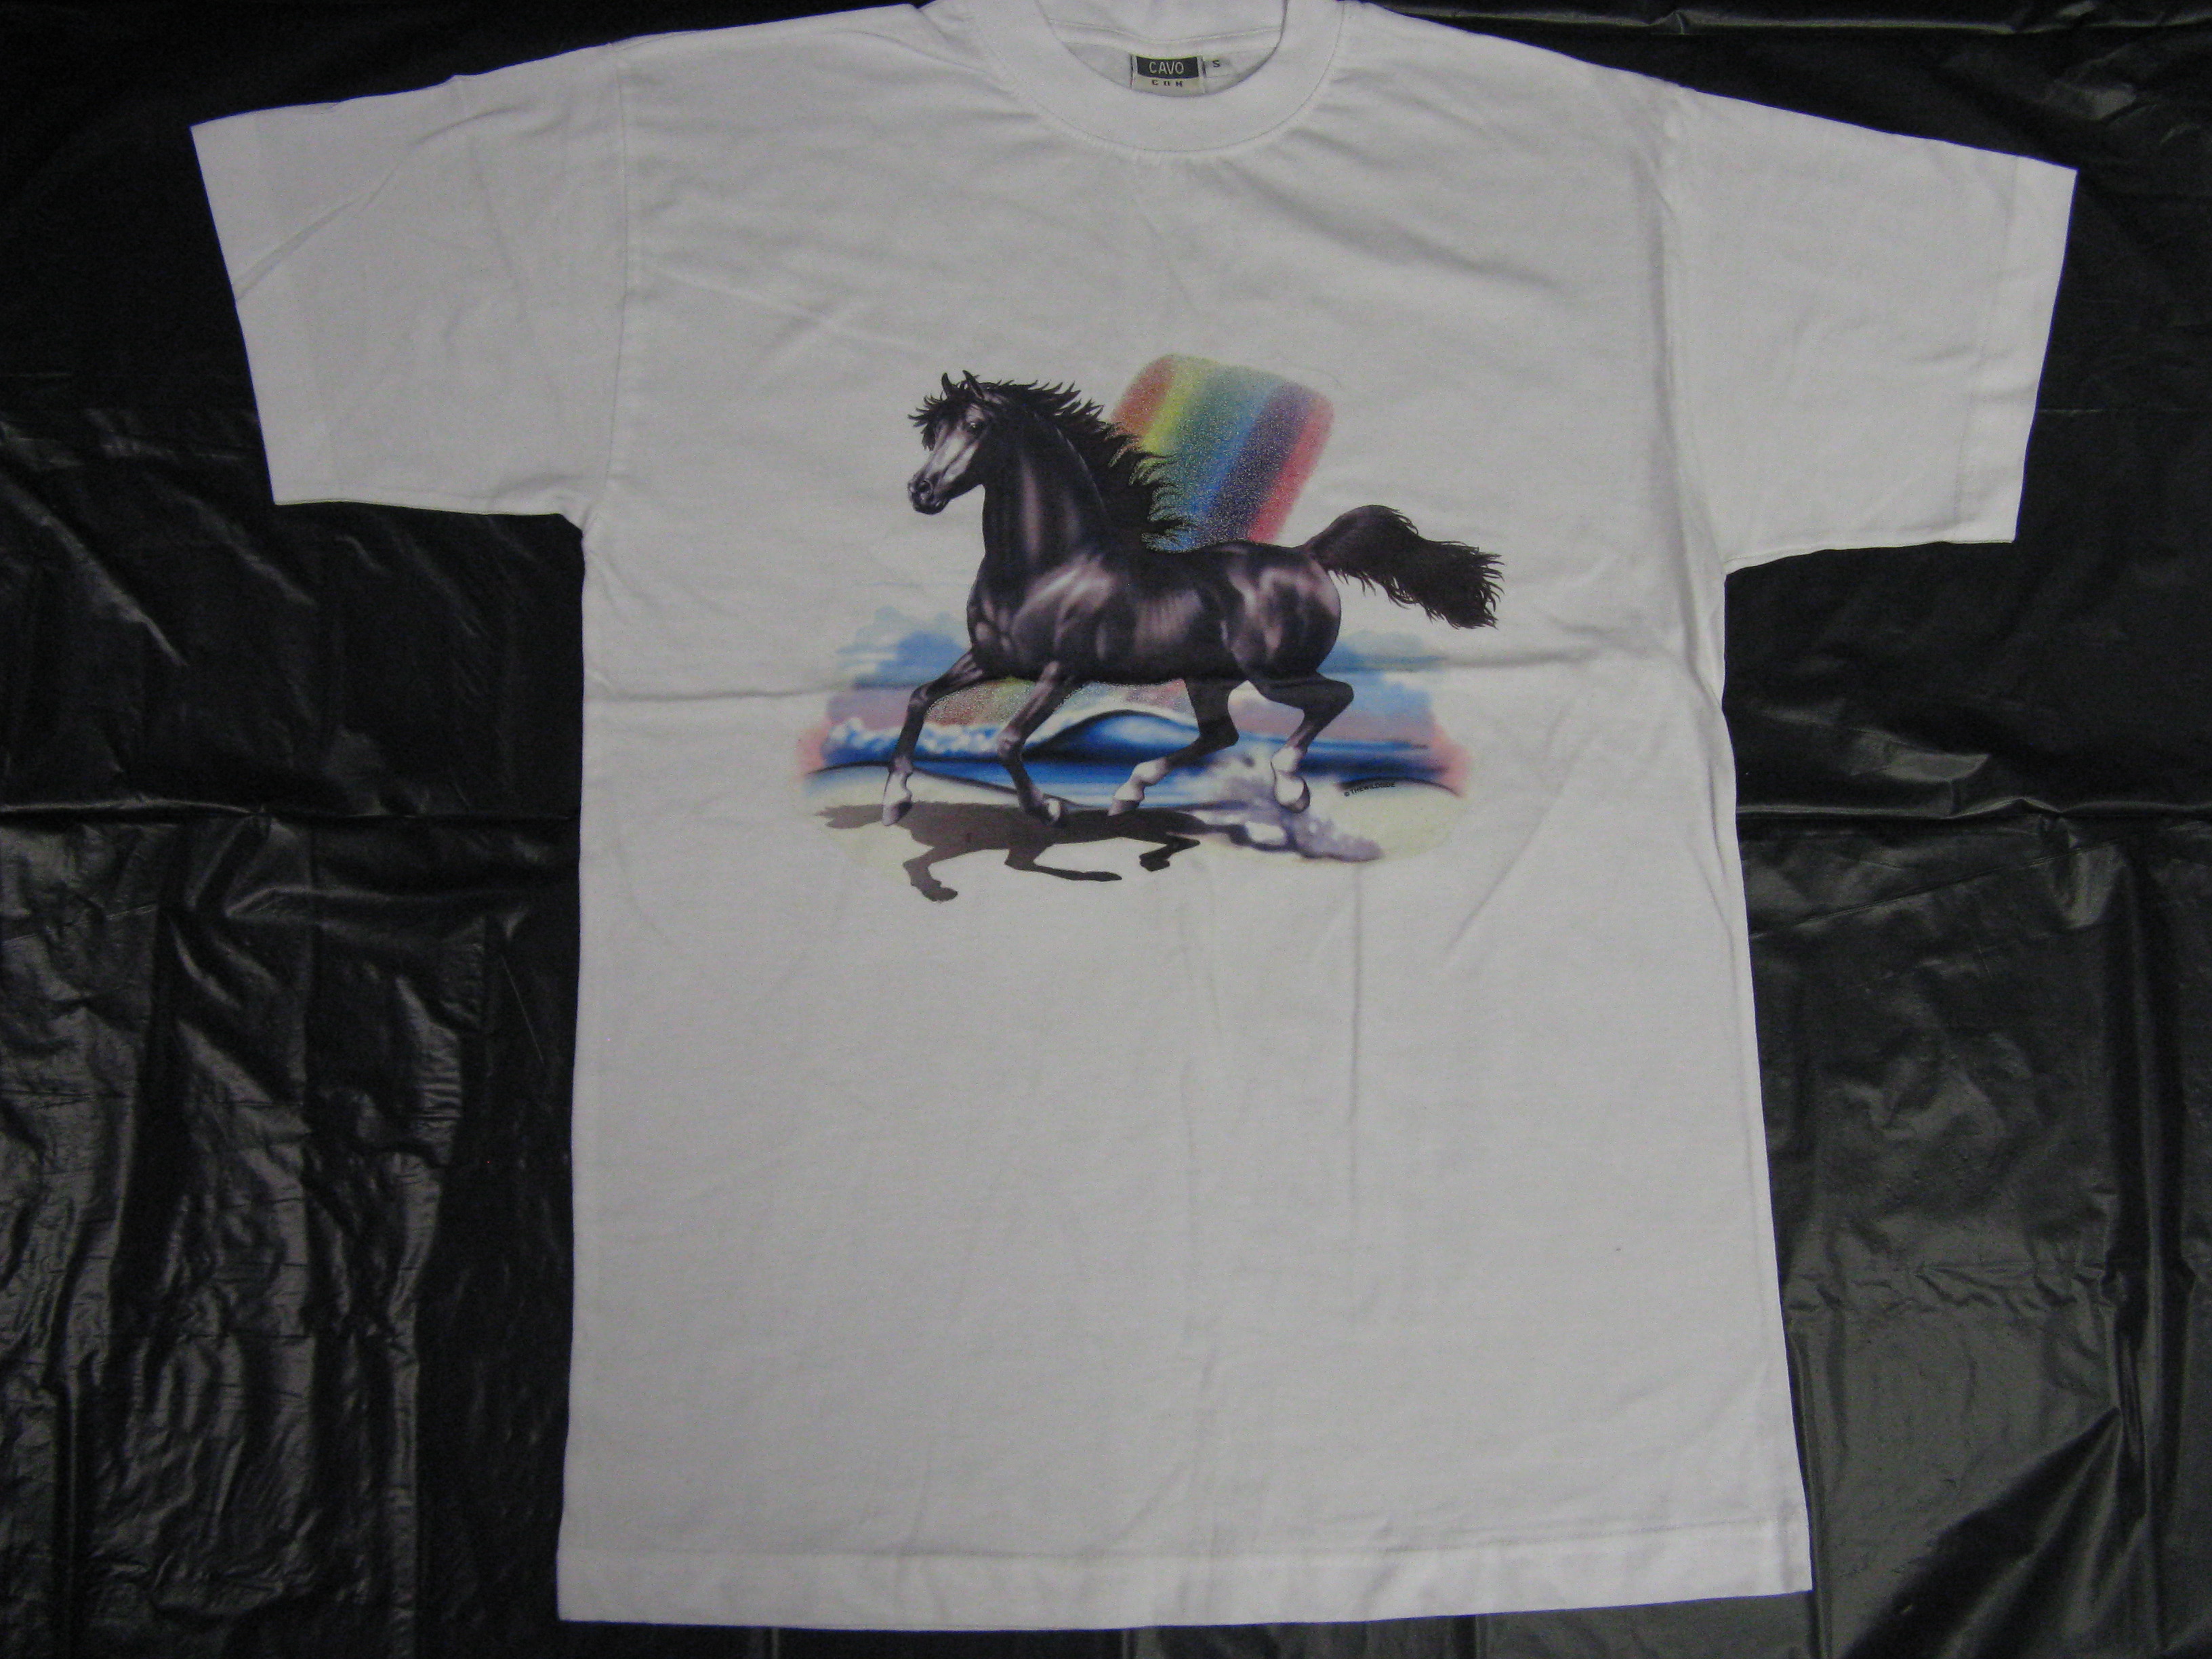 T-SHIRTHORSE RUNNING FAST-  UNFORGETTABLE GIFT- AMERICAN T-SHIRT PRINTED(CAT SLEEPING NEAR HAT) AMERICAN MOTIVE-TOP QUALITY-LOWEST PRICE GAURANTEE-DO NOT MISS THIS CHANCE-FREE HOME(POST OFFICE) DELIVERY-ART NO. 1979122653-REA 50%